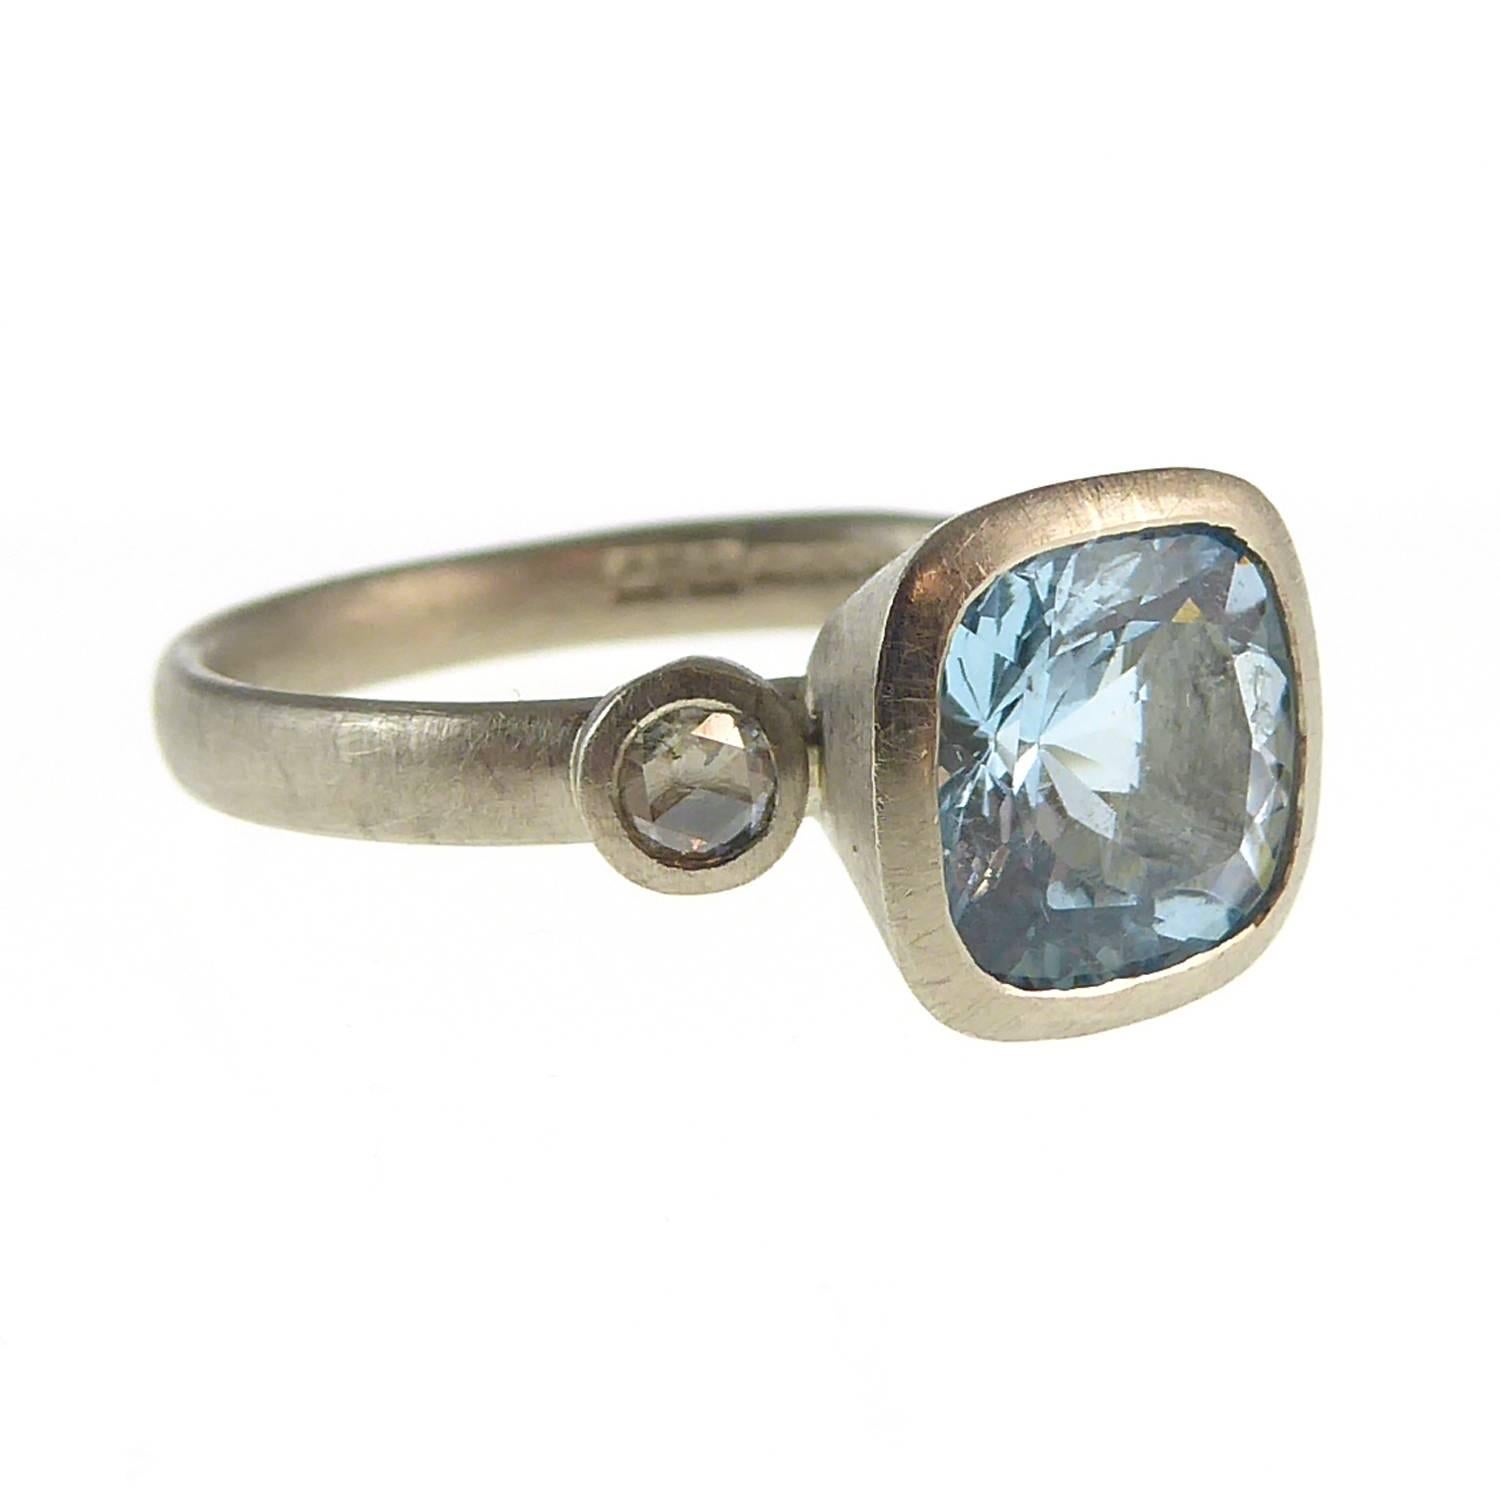 A beautifully hand-crafted aquamarine and diamond ring by Alex Goodman of the Goodman & Morris design team from the UK.

The design is known as the 